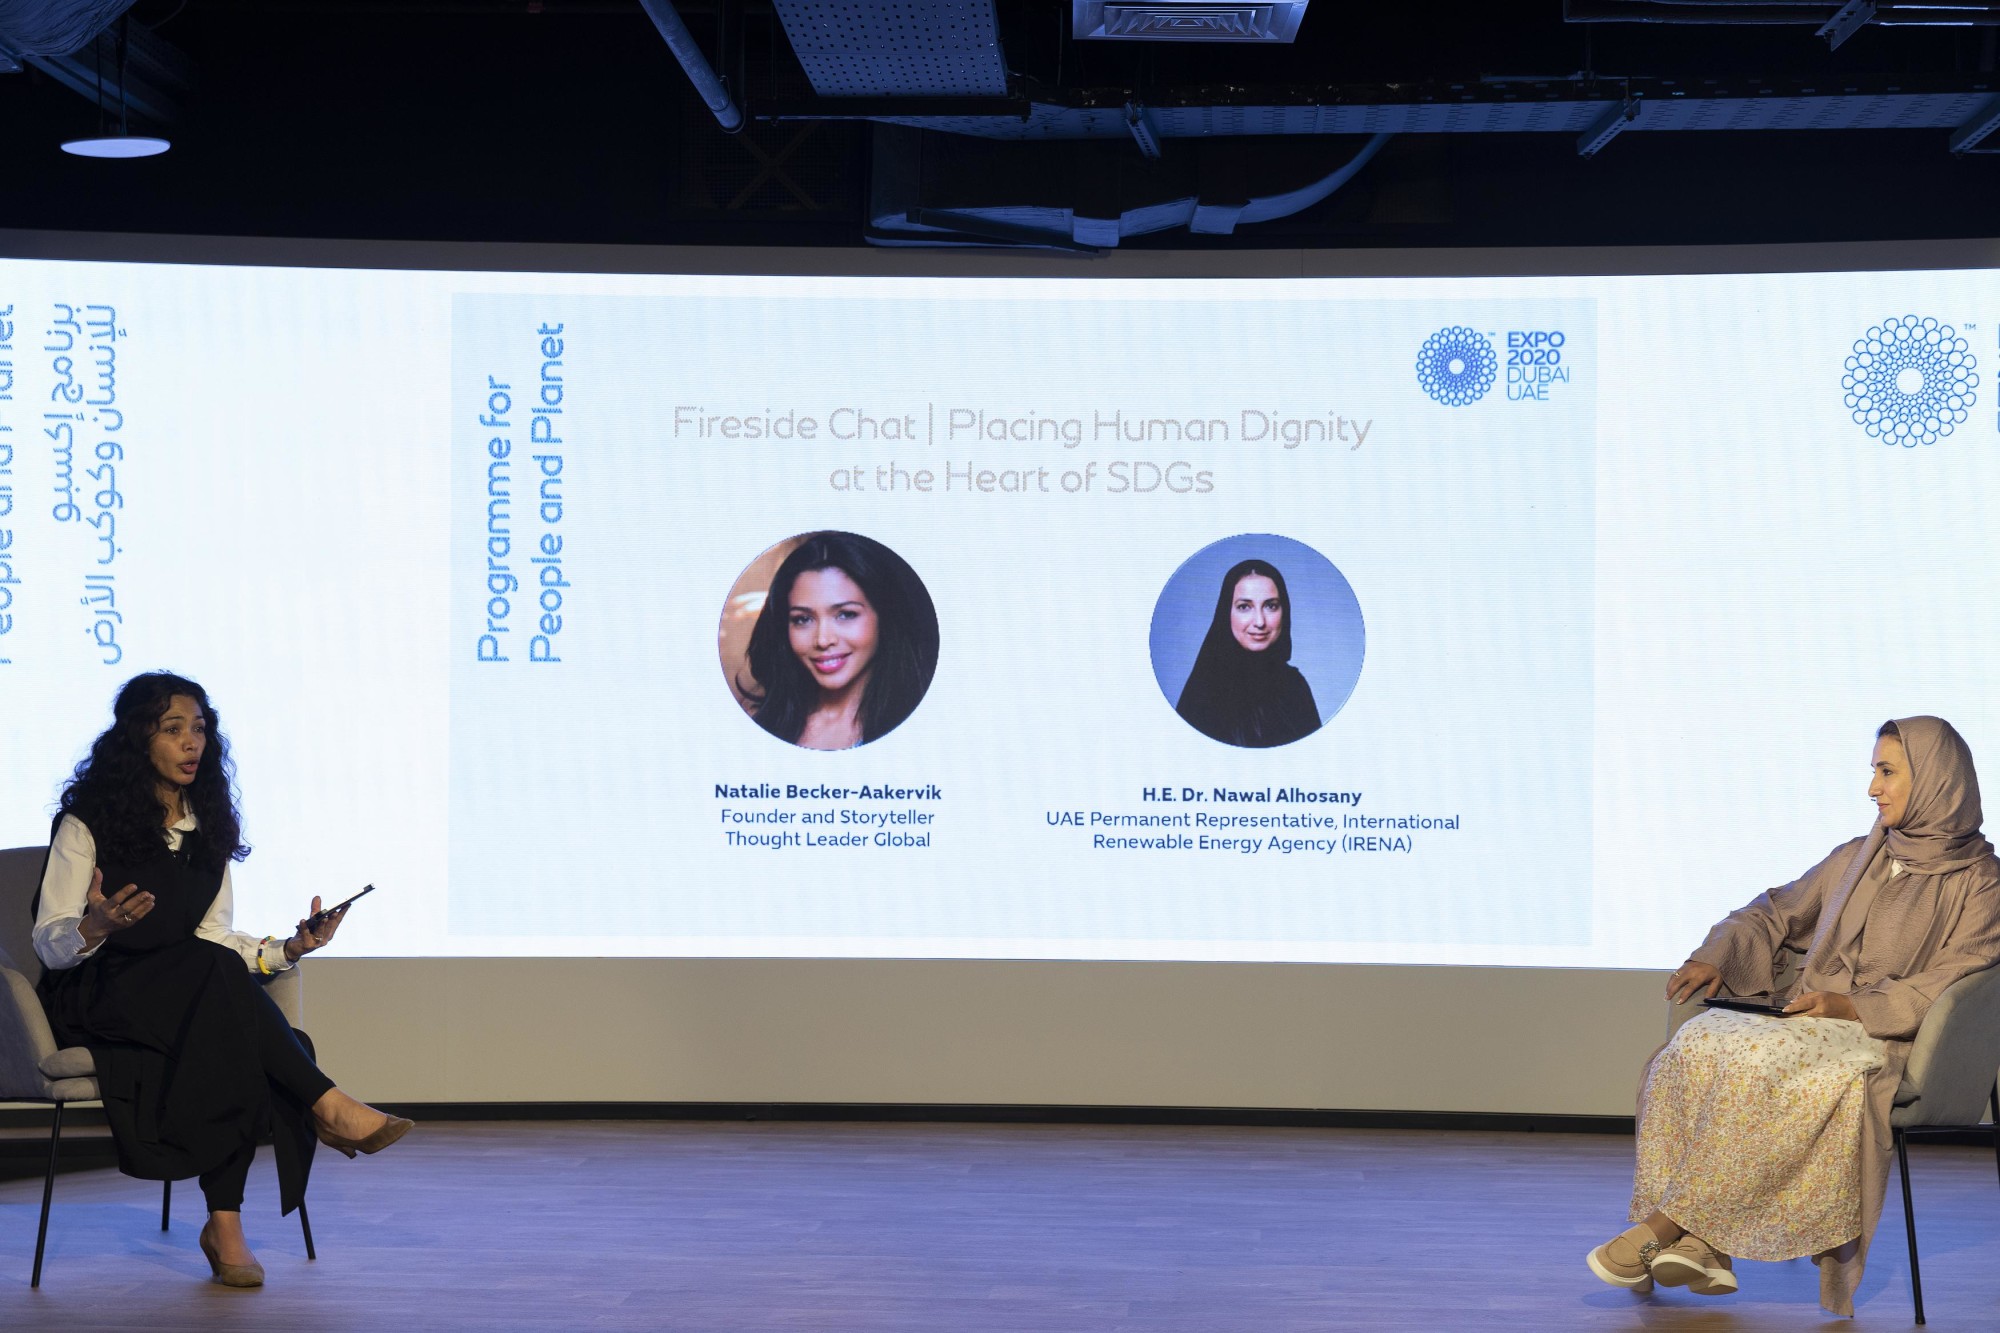 Her Excellency Dr Nawal Al-Hosany (R), Permanent Representative of the UAE to the International Renewable Energy Agency (IRENA) and Natalie Becker-Aakervik (L), Founder, Storyteller, Thought Leader Global and moderator during the Water-Food